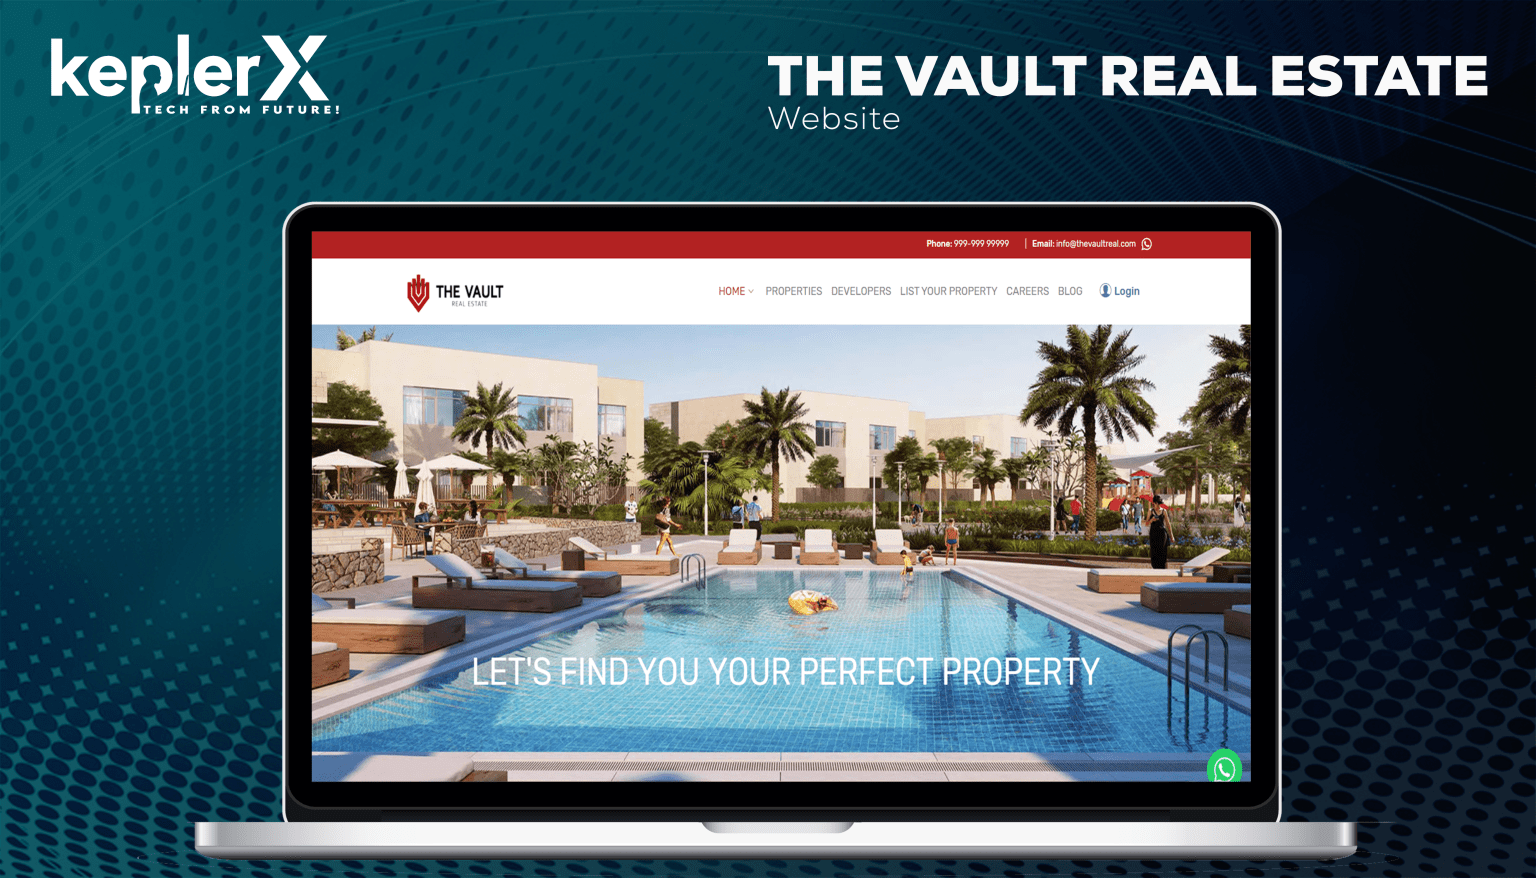 The Vault Real Estate